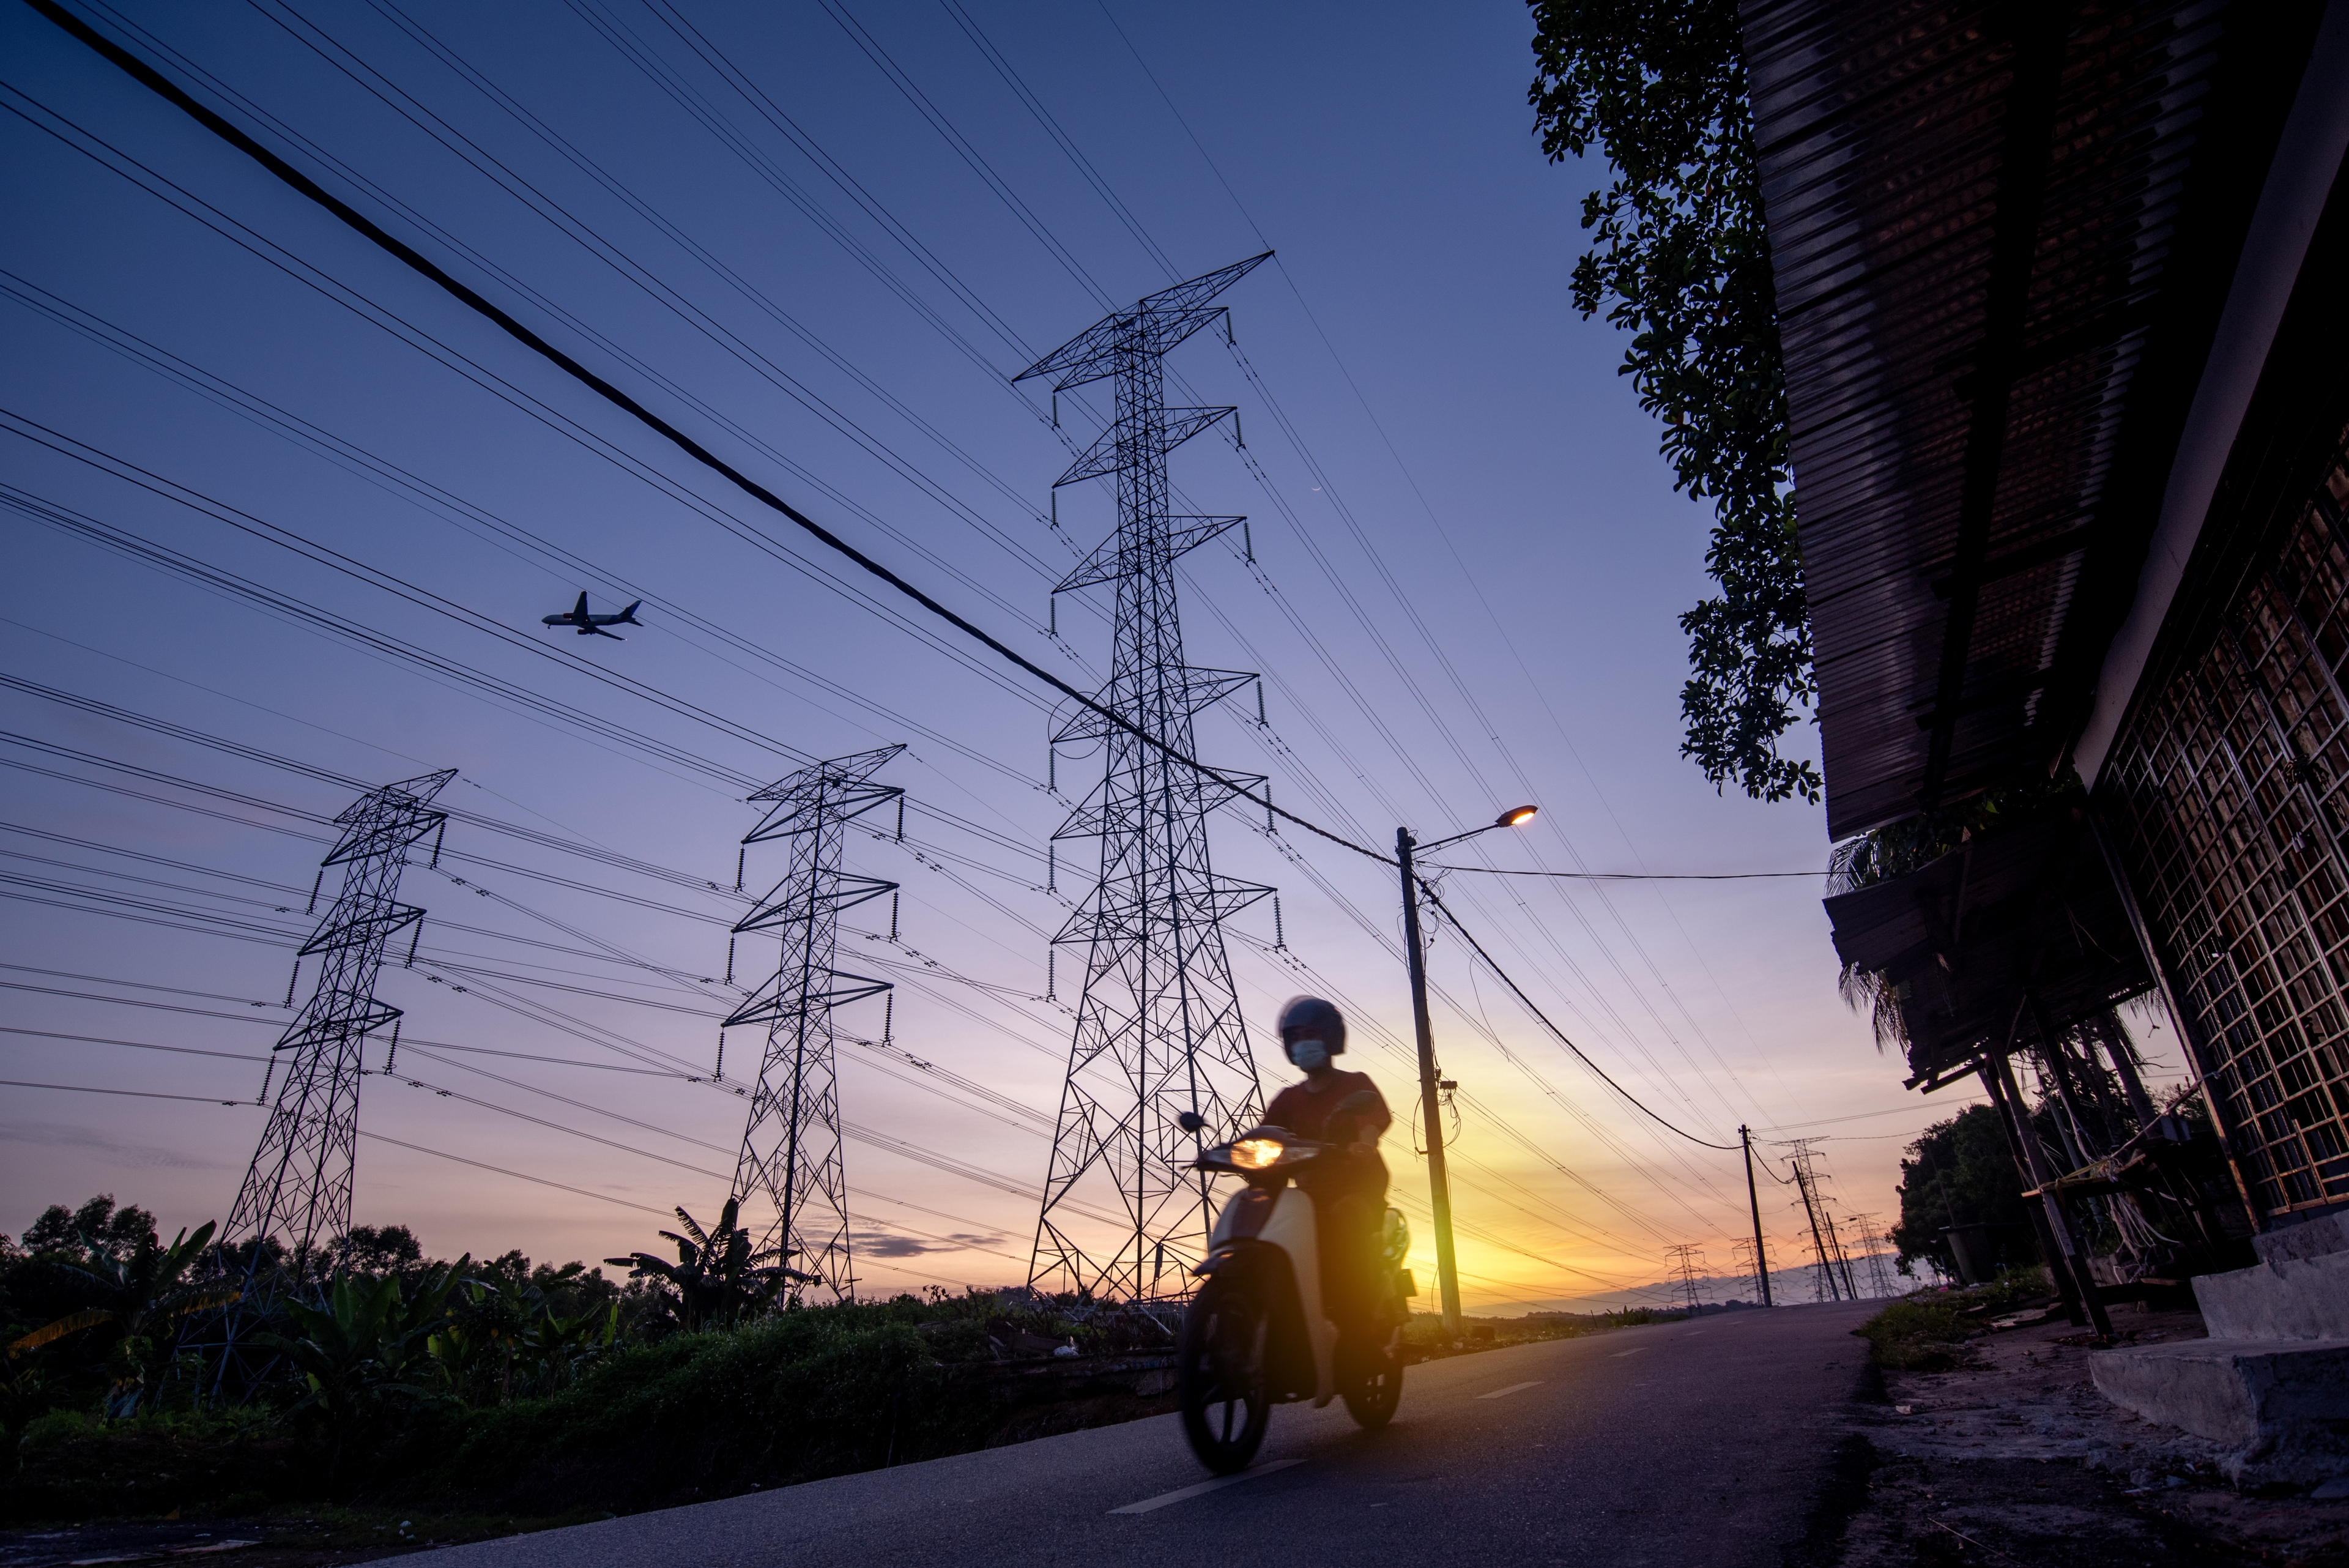 Electricity pylons at night with man on a motor scooter driving down the road to the backdrop of a sunset. card